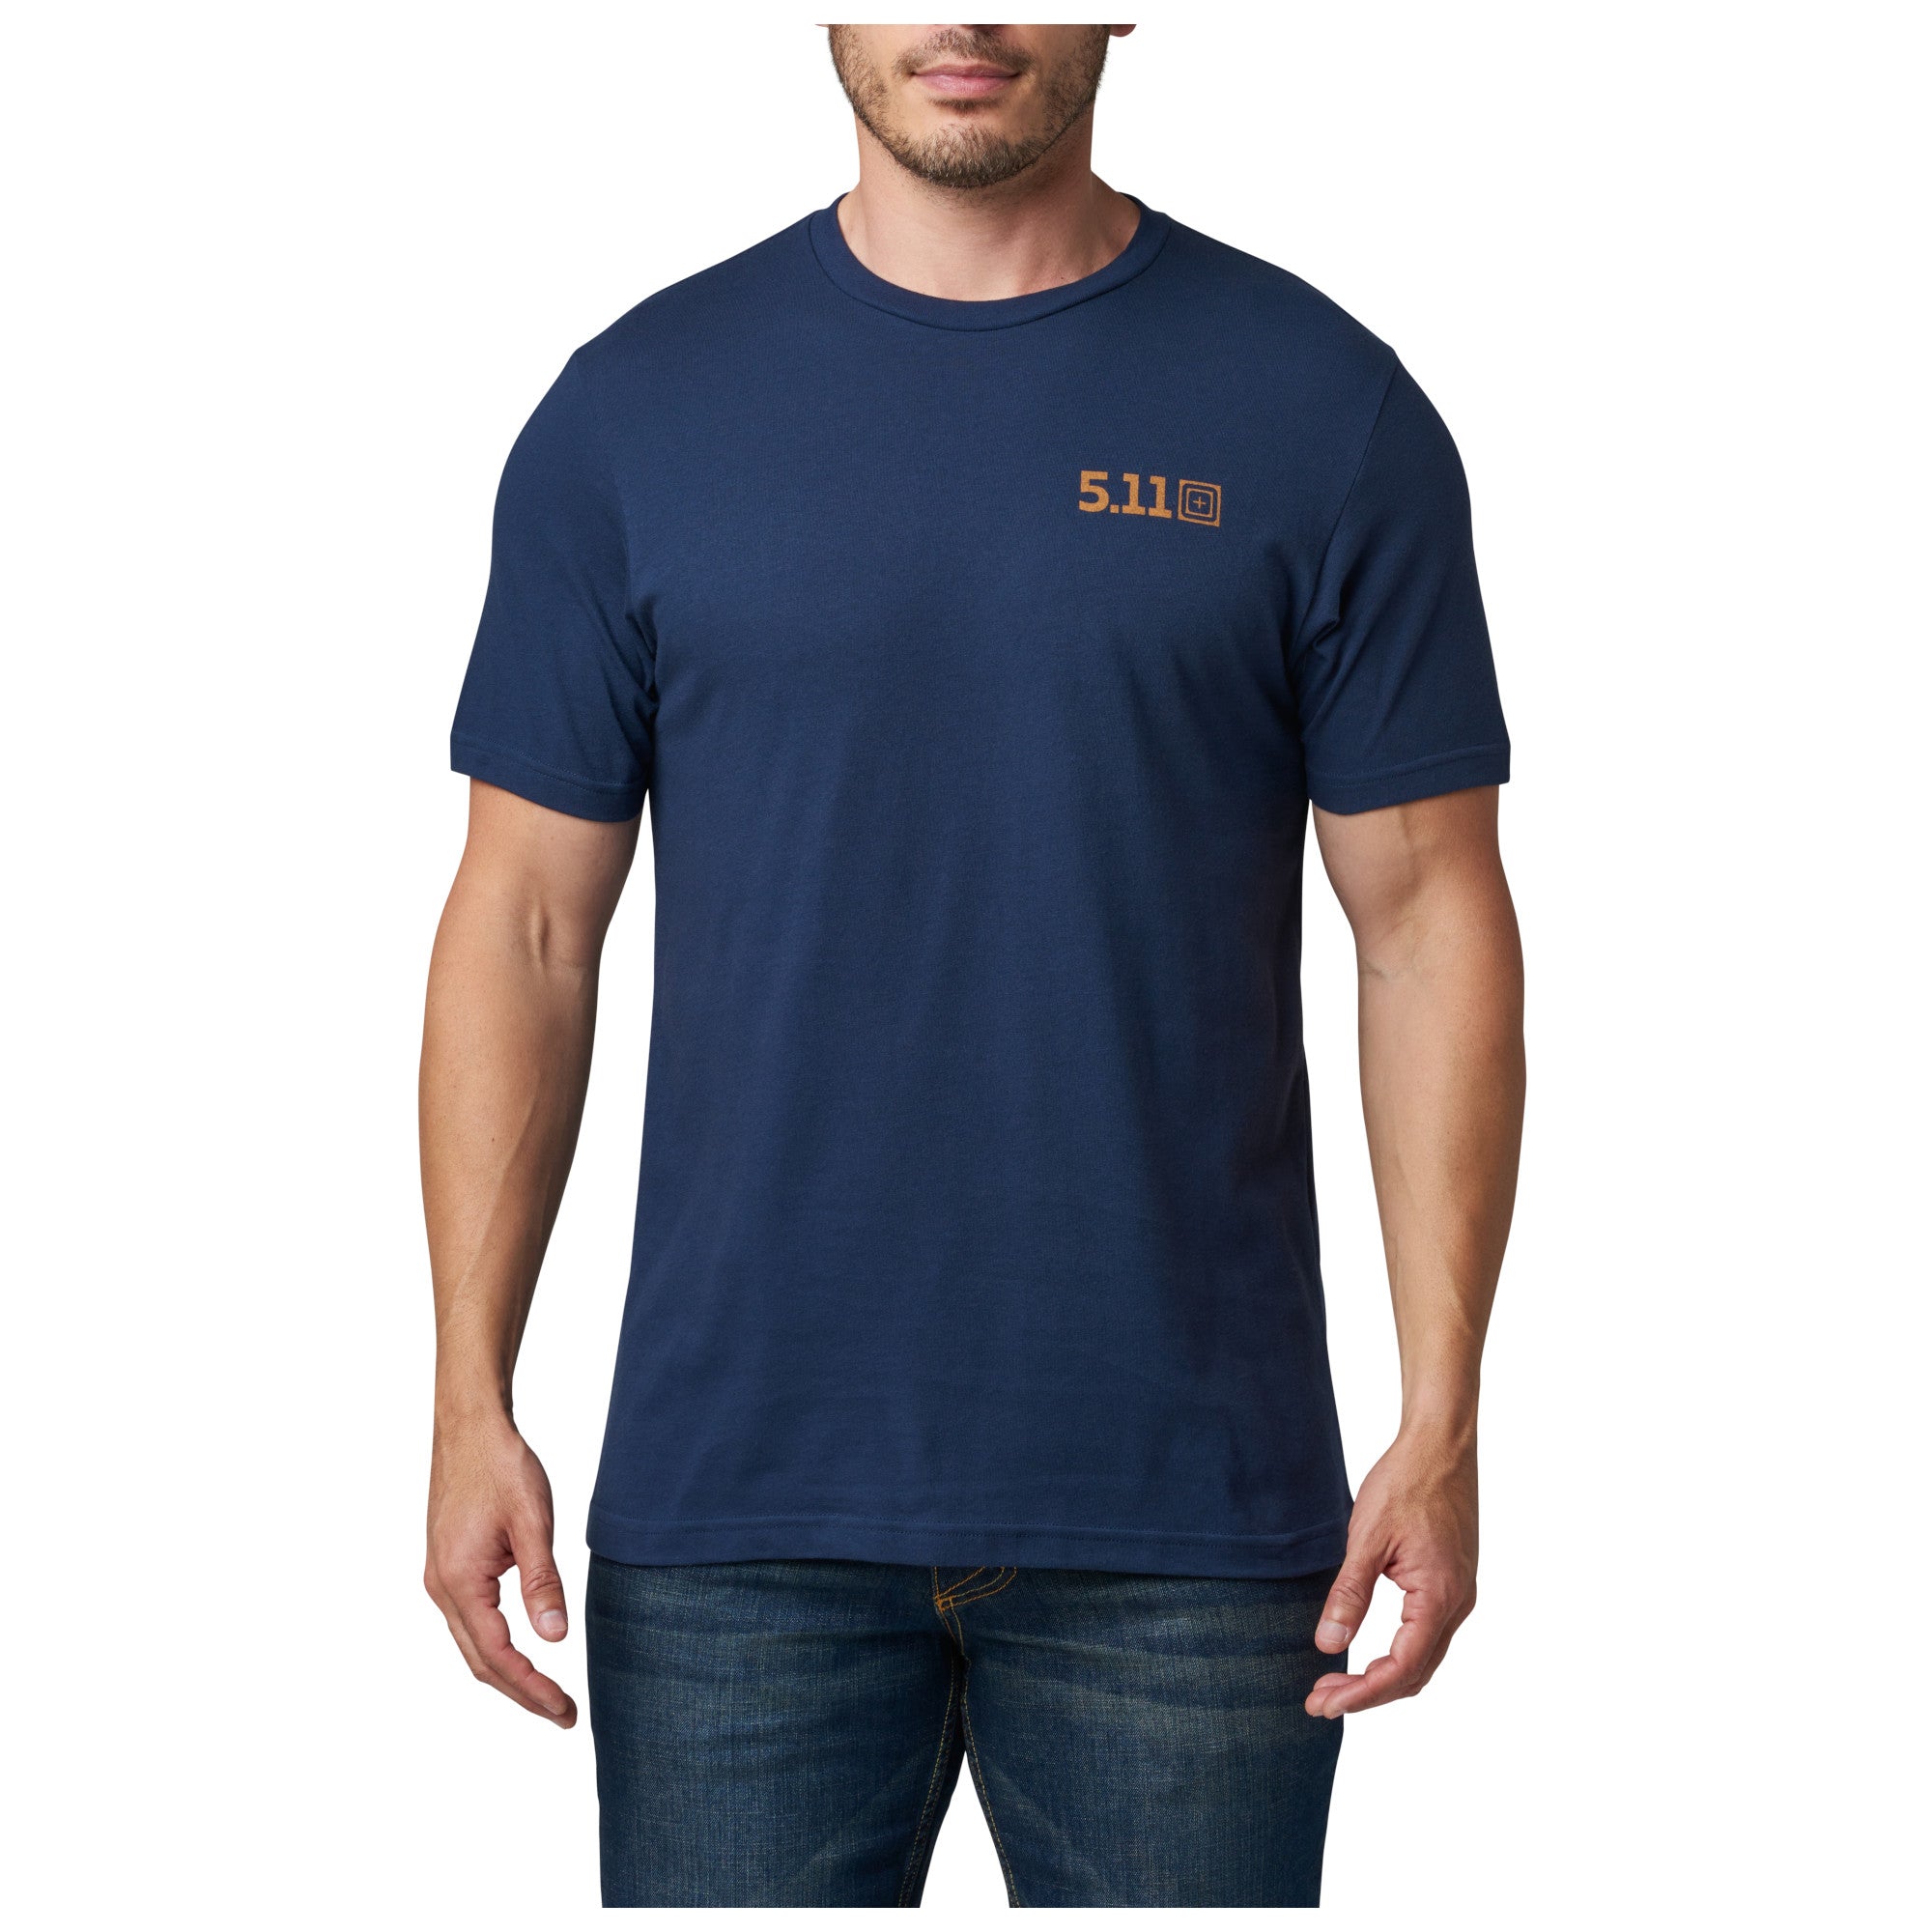 5.11 Tactical Freedom Fries Tee Pacific Navy Tees & Tanks 5.11 Tactical Small Tactical Gear Supplier Tactical Distributors Australia